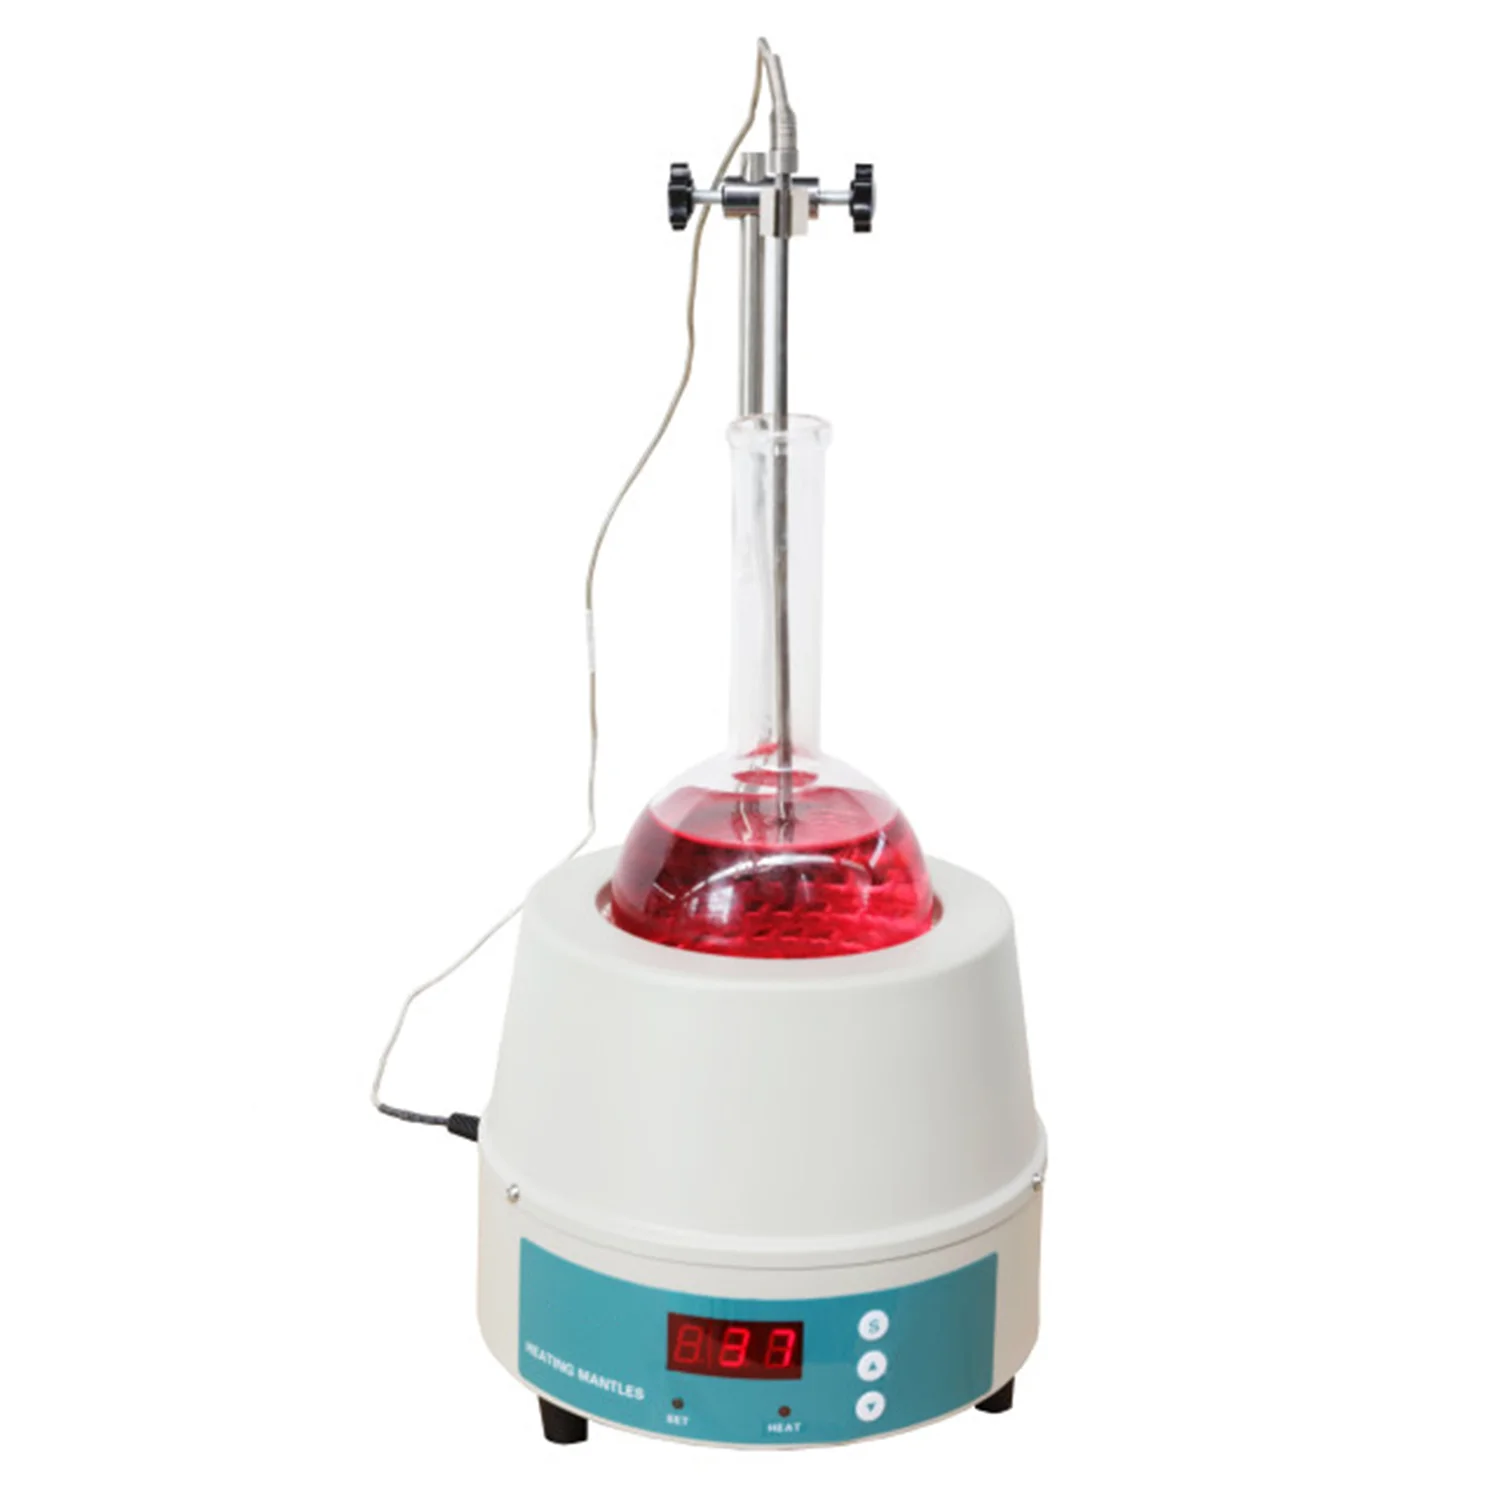 

IKEME 50ml-20000ml Digital Display Temperature Control Electric Laboratory Heating Mantle With Magnetic Stirrer